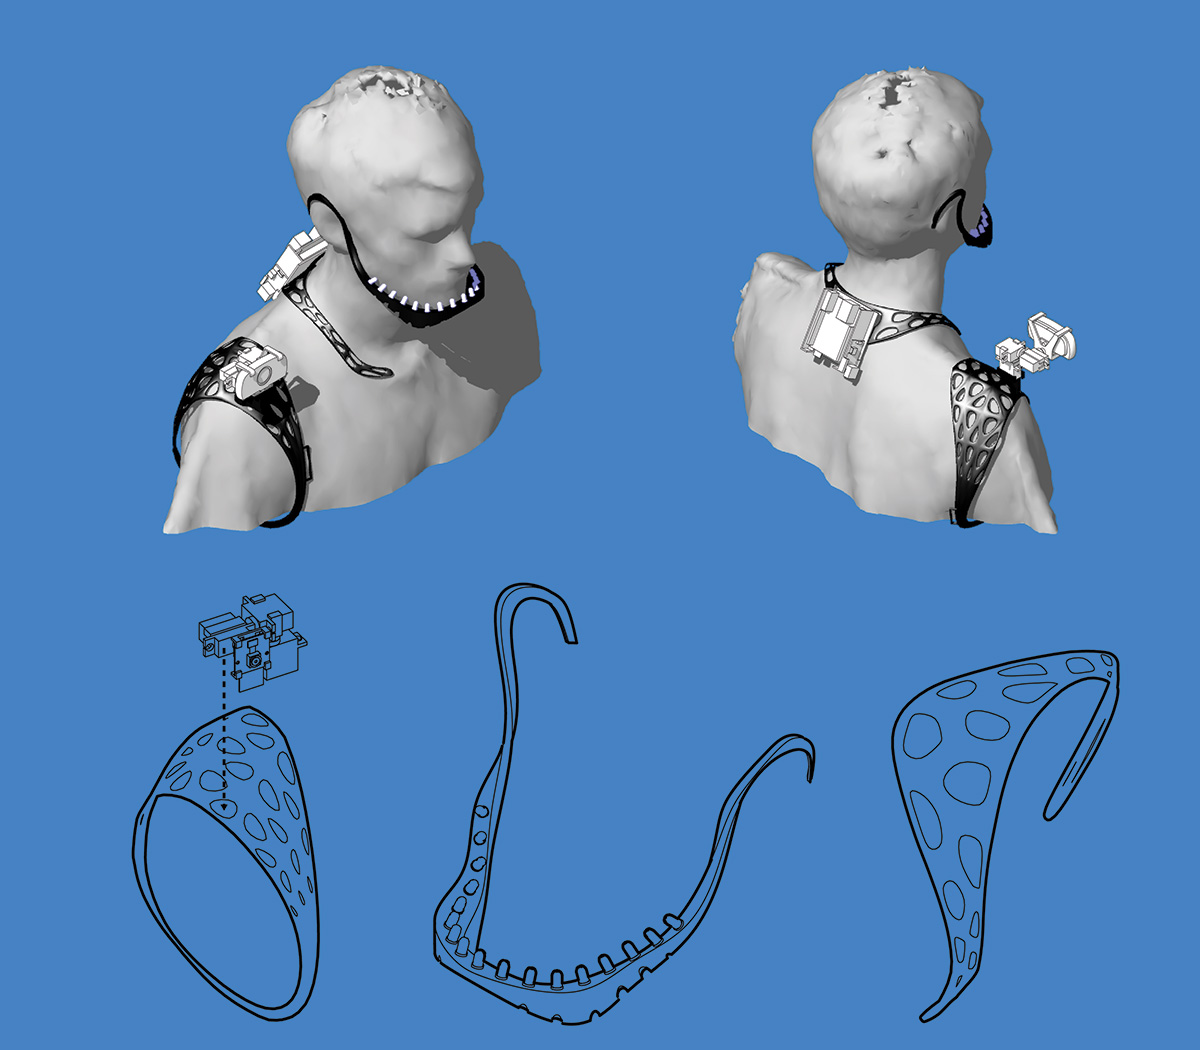 a 3D image of a person wearing a shoulder and headset